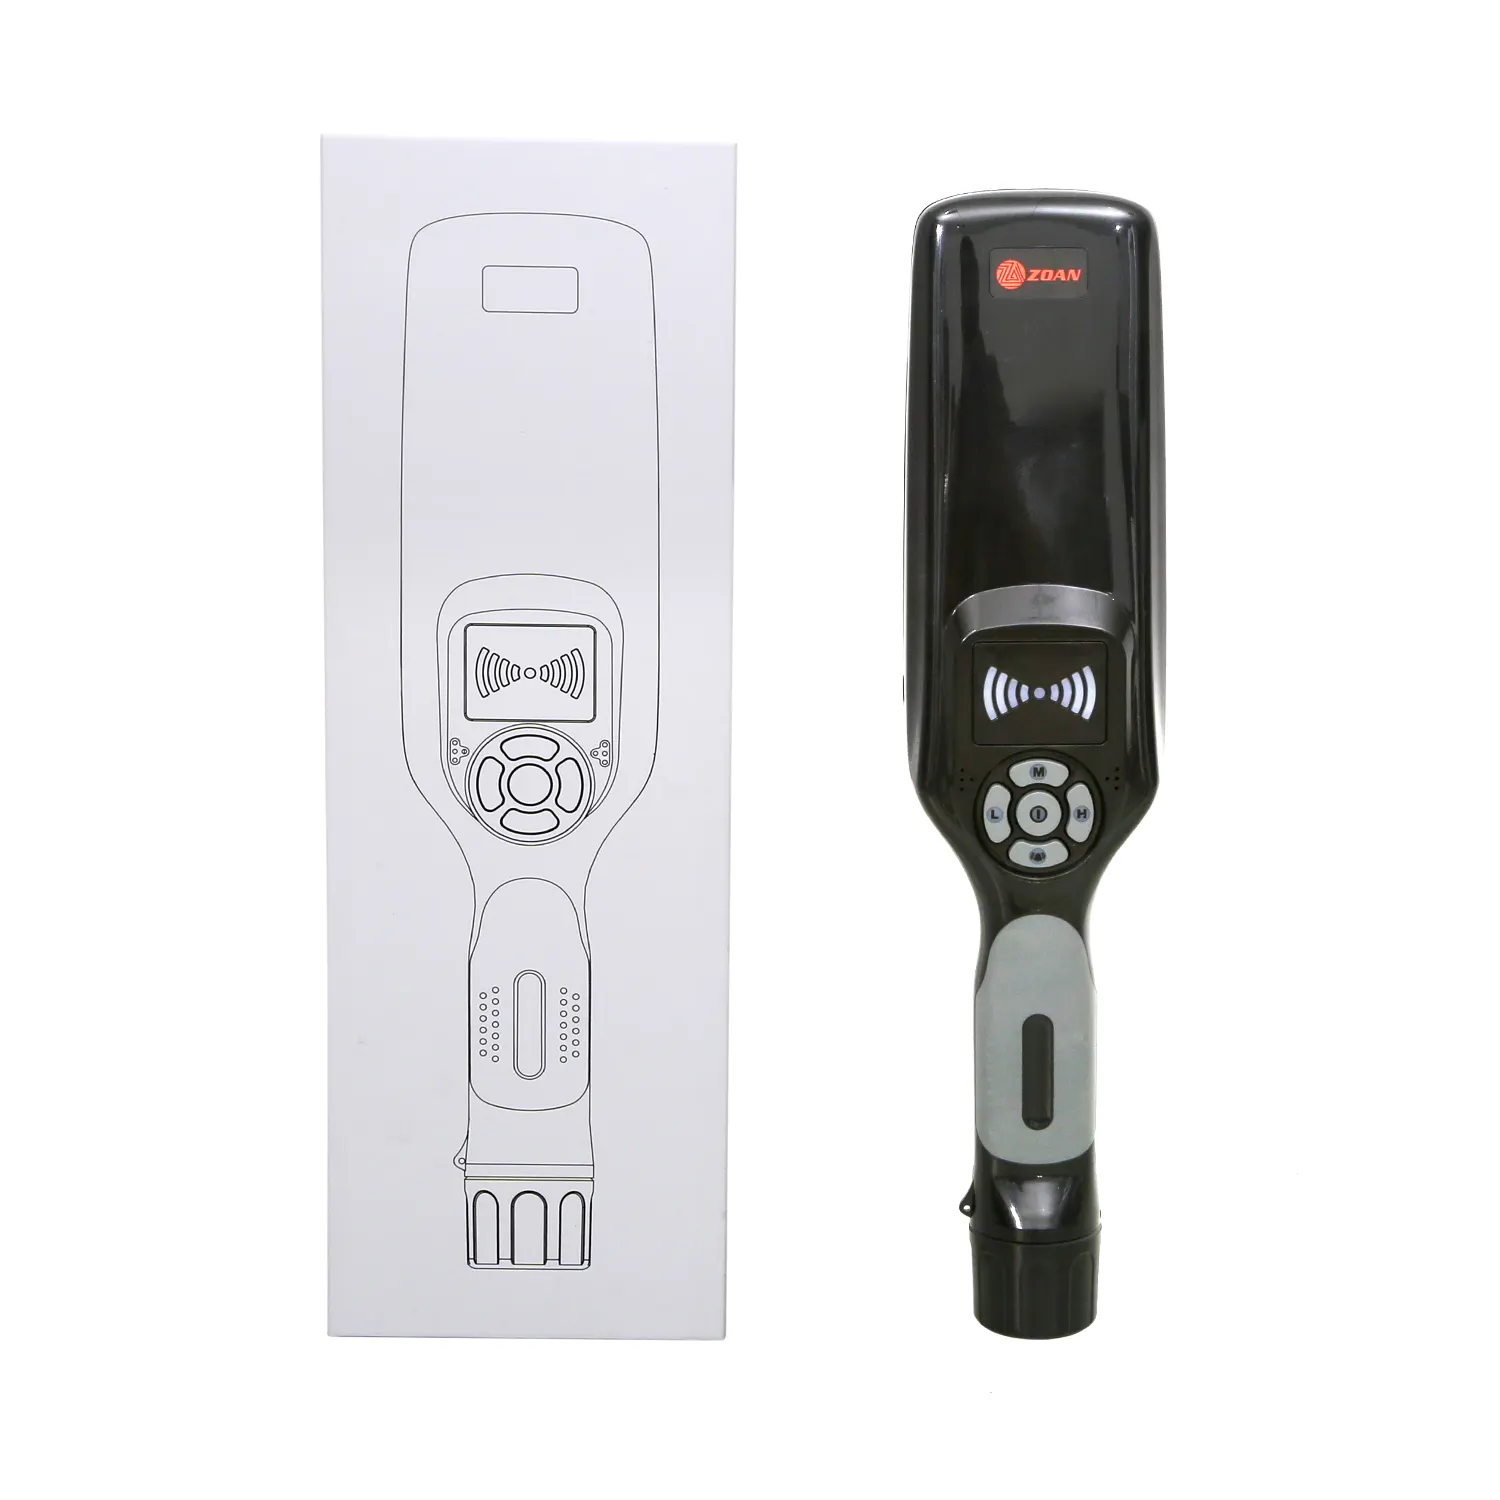 ZA360 super hand held metal detector for airport and metro